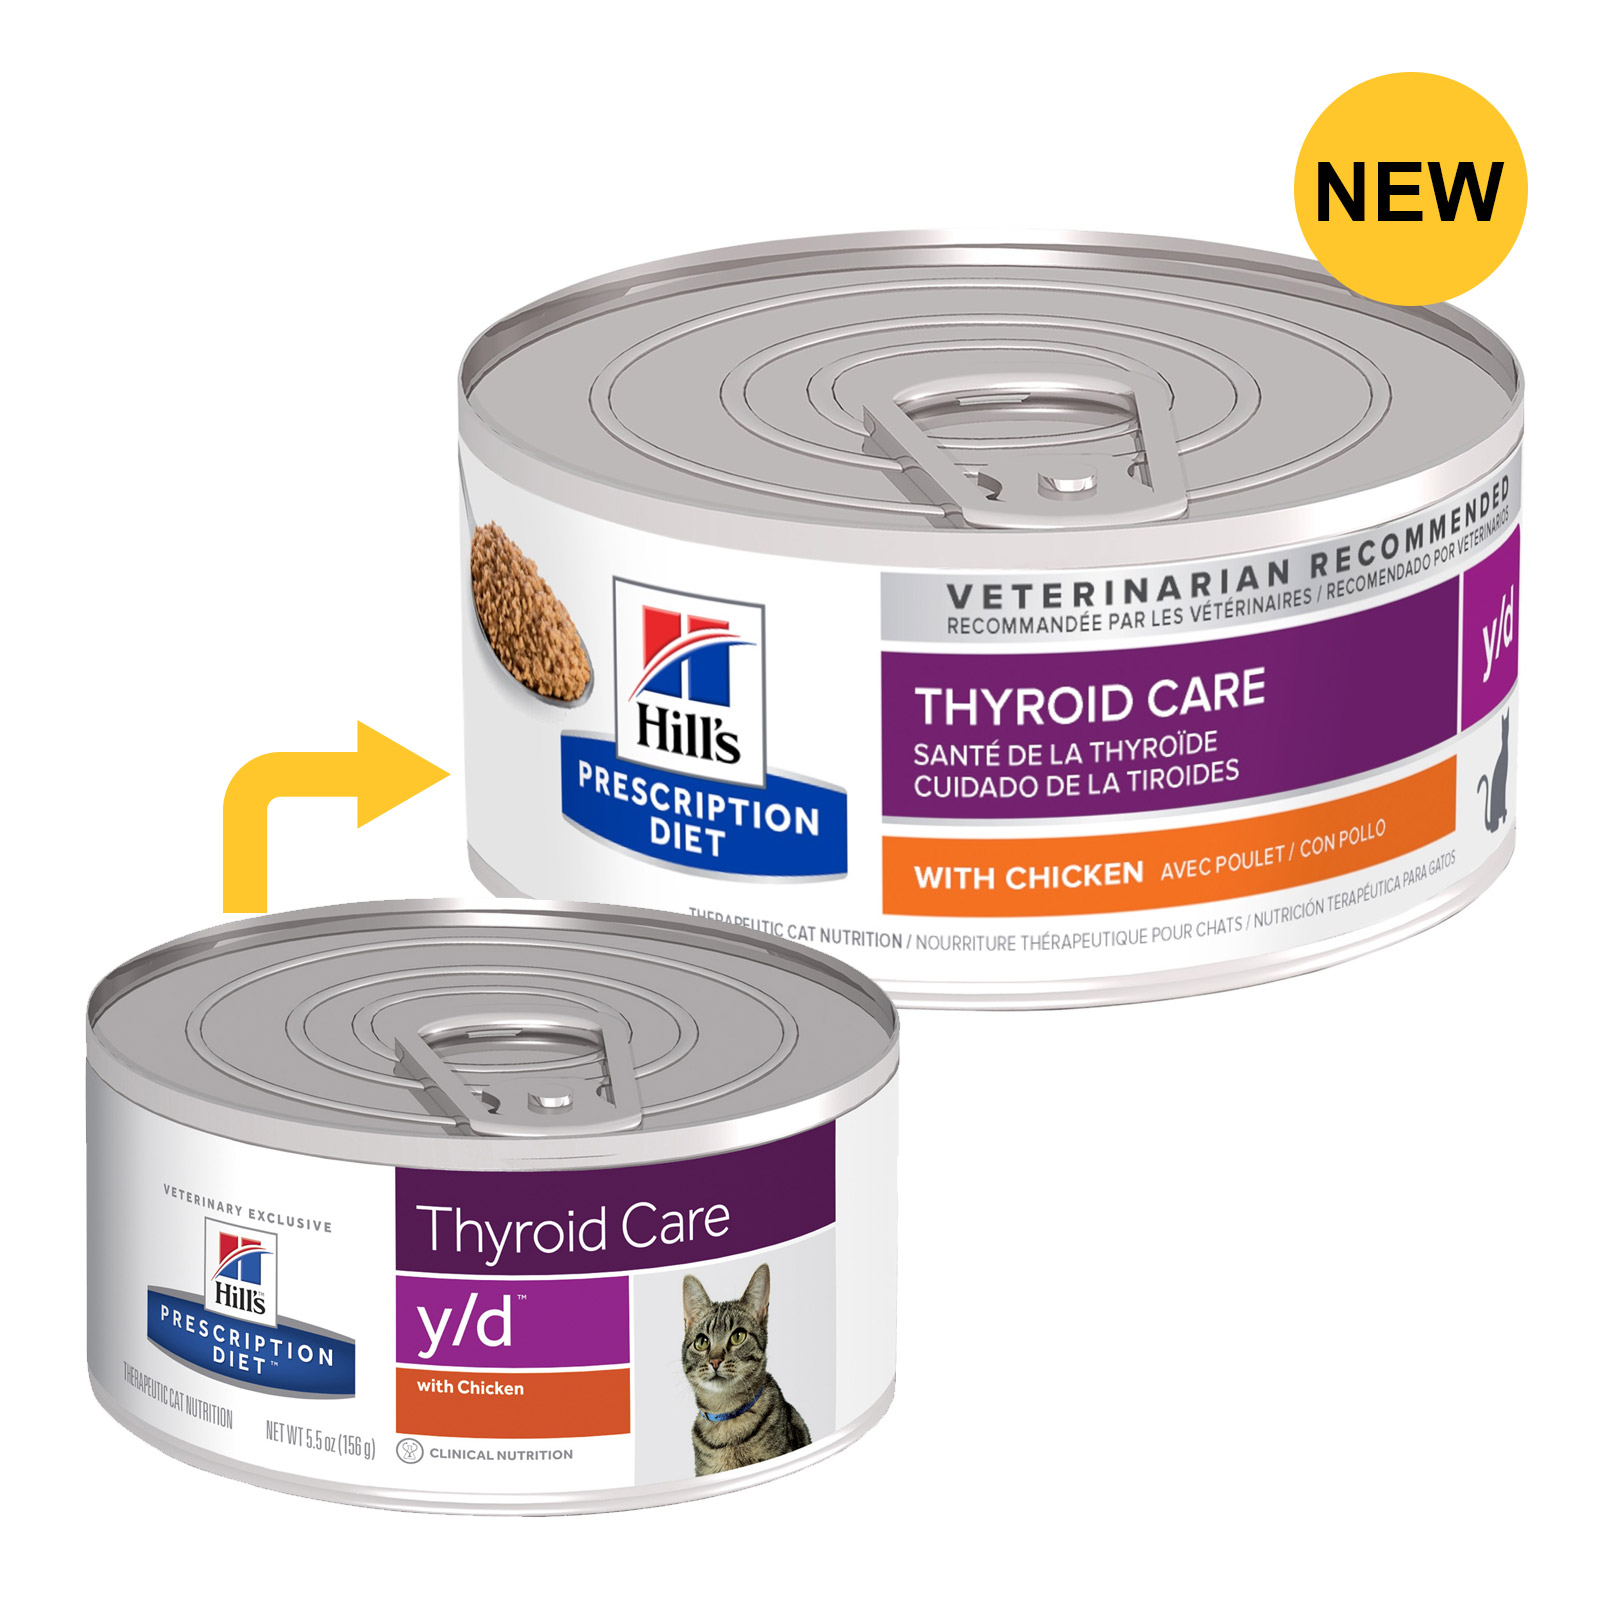 Hill's Prescription Diet Feline y/d Thyroid Care Chicken Cans for Food